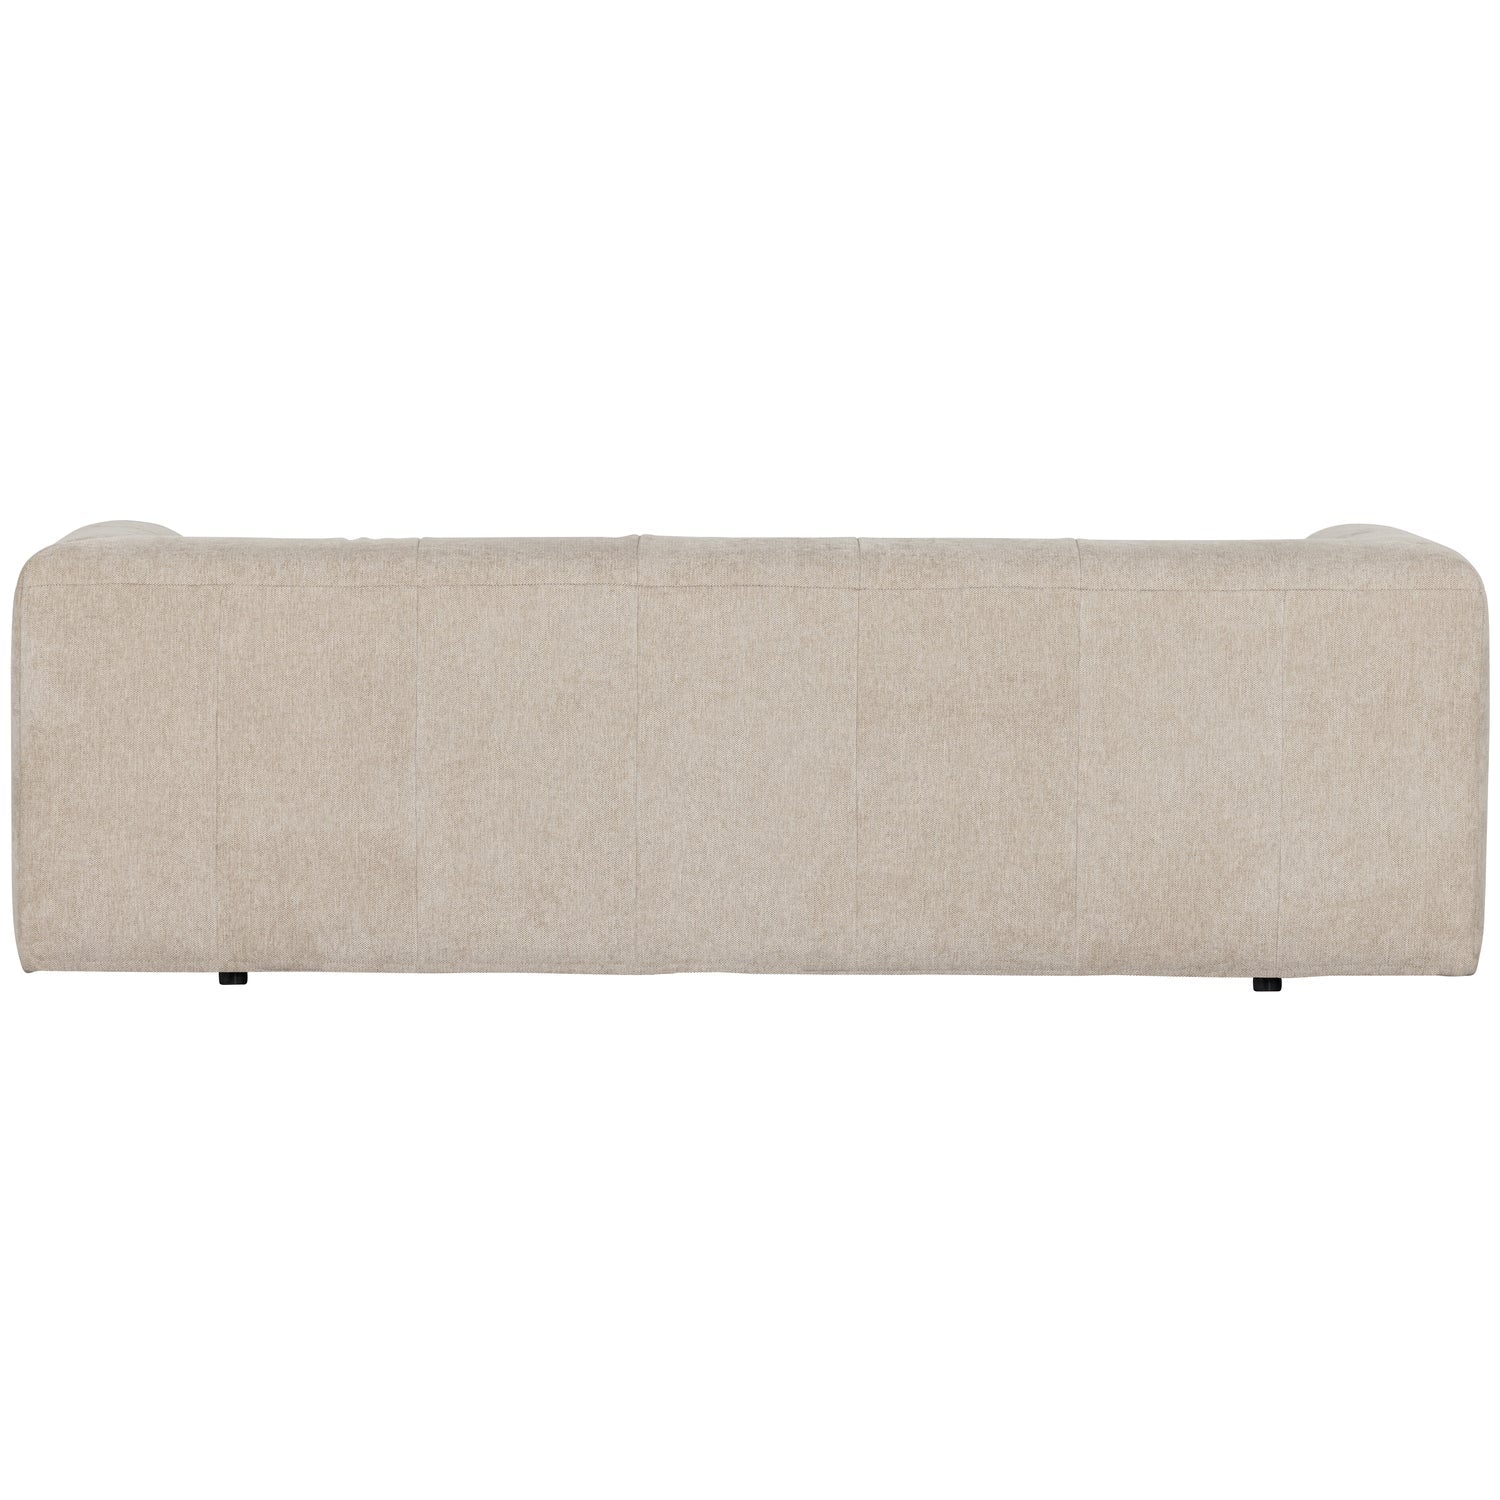 GRID 3-SEATER WOVEN FABRIC SAND